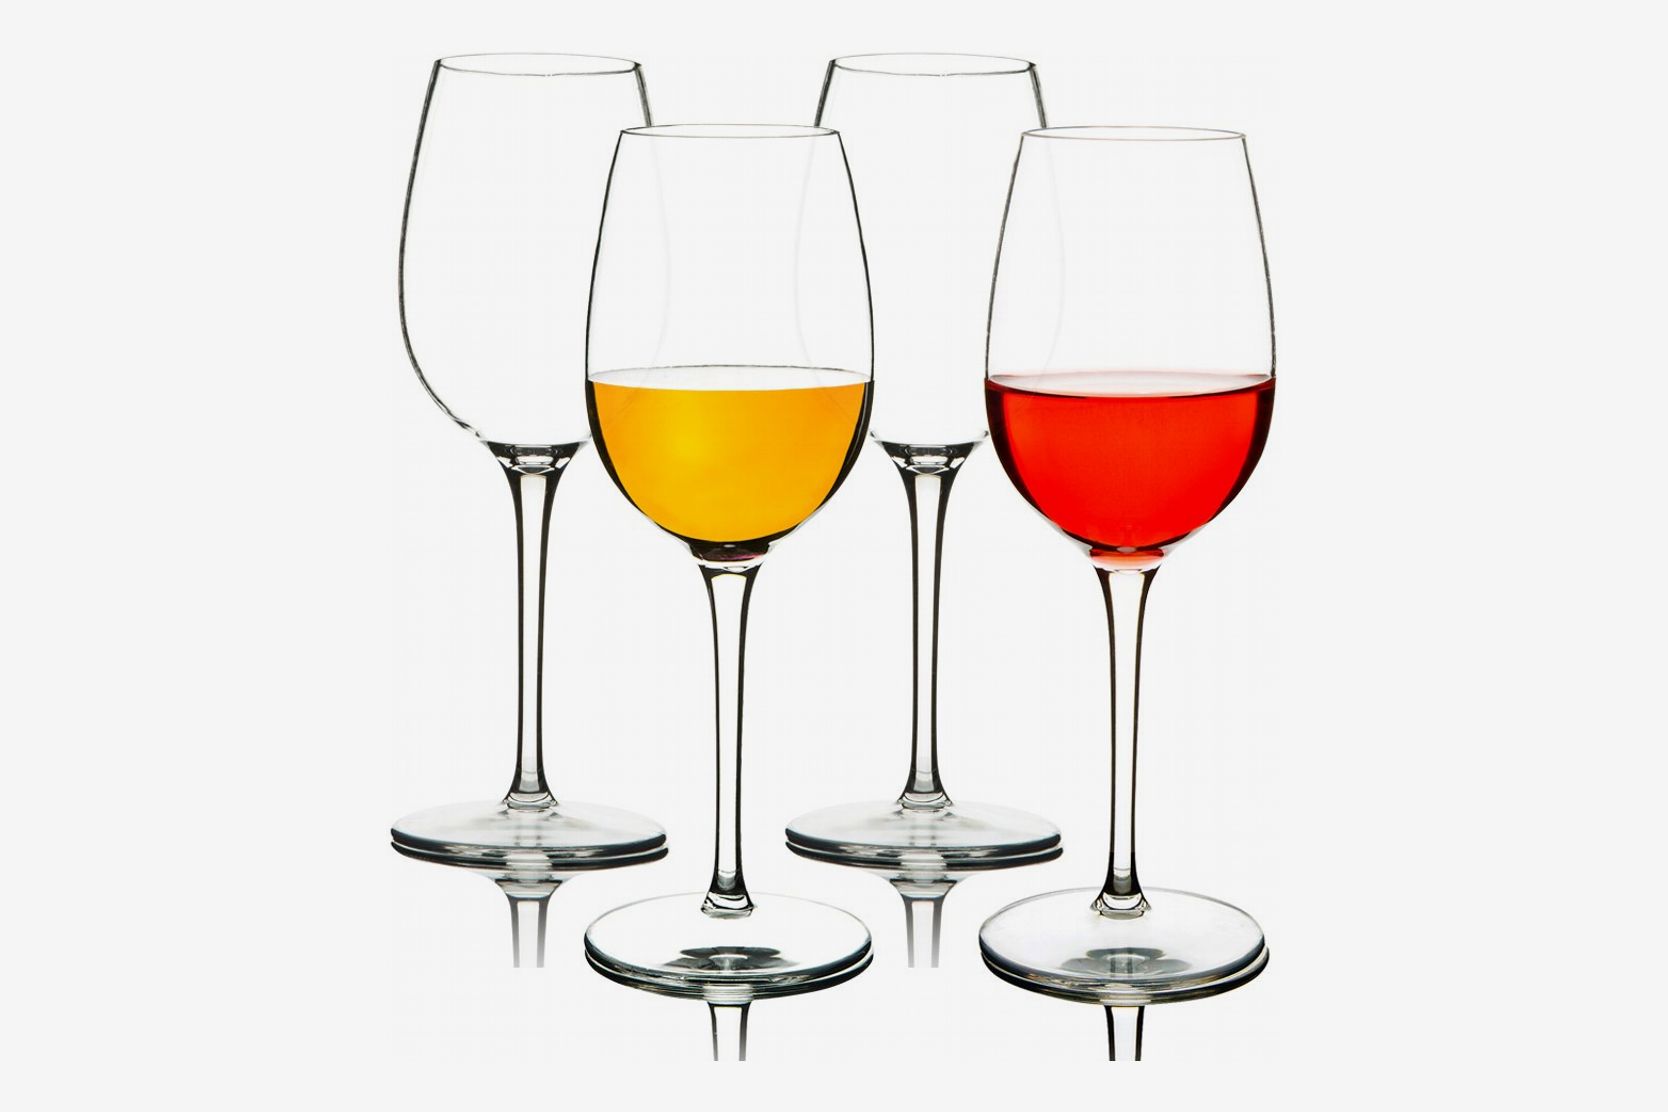 4 Mixed Set of Wine and Tumbler Glasses in Black and White Realistic Alternative to Glass Unbreakable Reusable Polycarbonate Plastic Glasses 